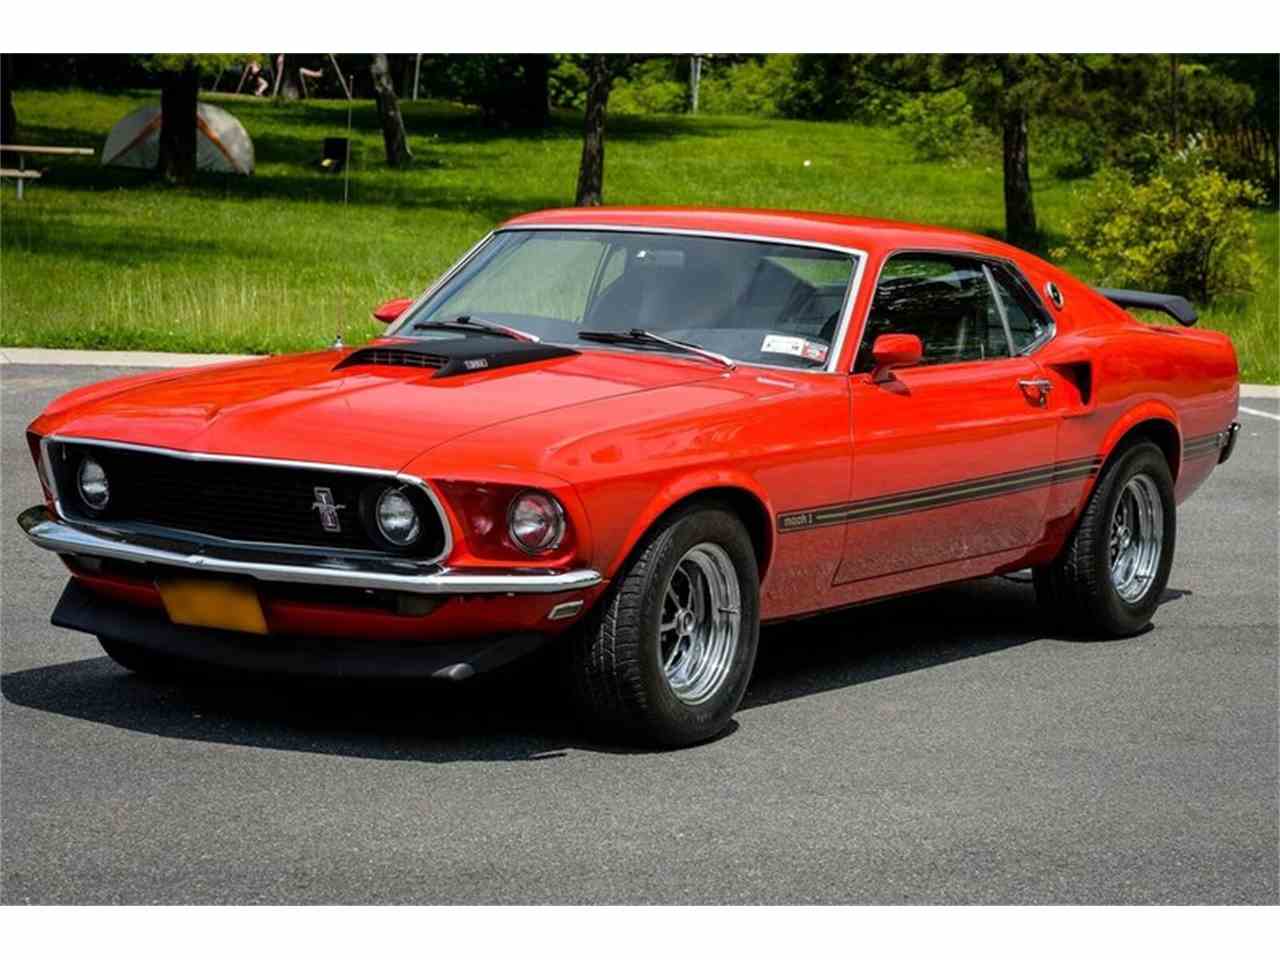 1969 Ford Mustang MACH 1 Fastback for Sale | ClassicCars.com | CC-1020725